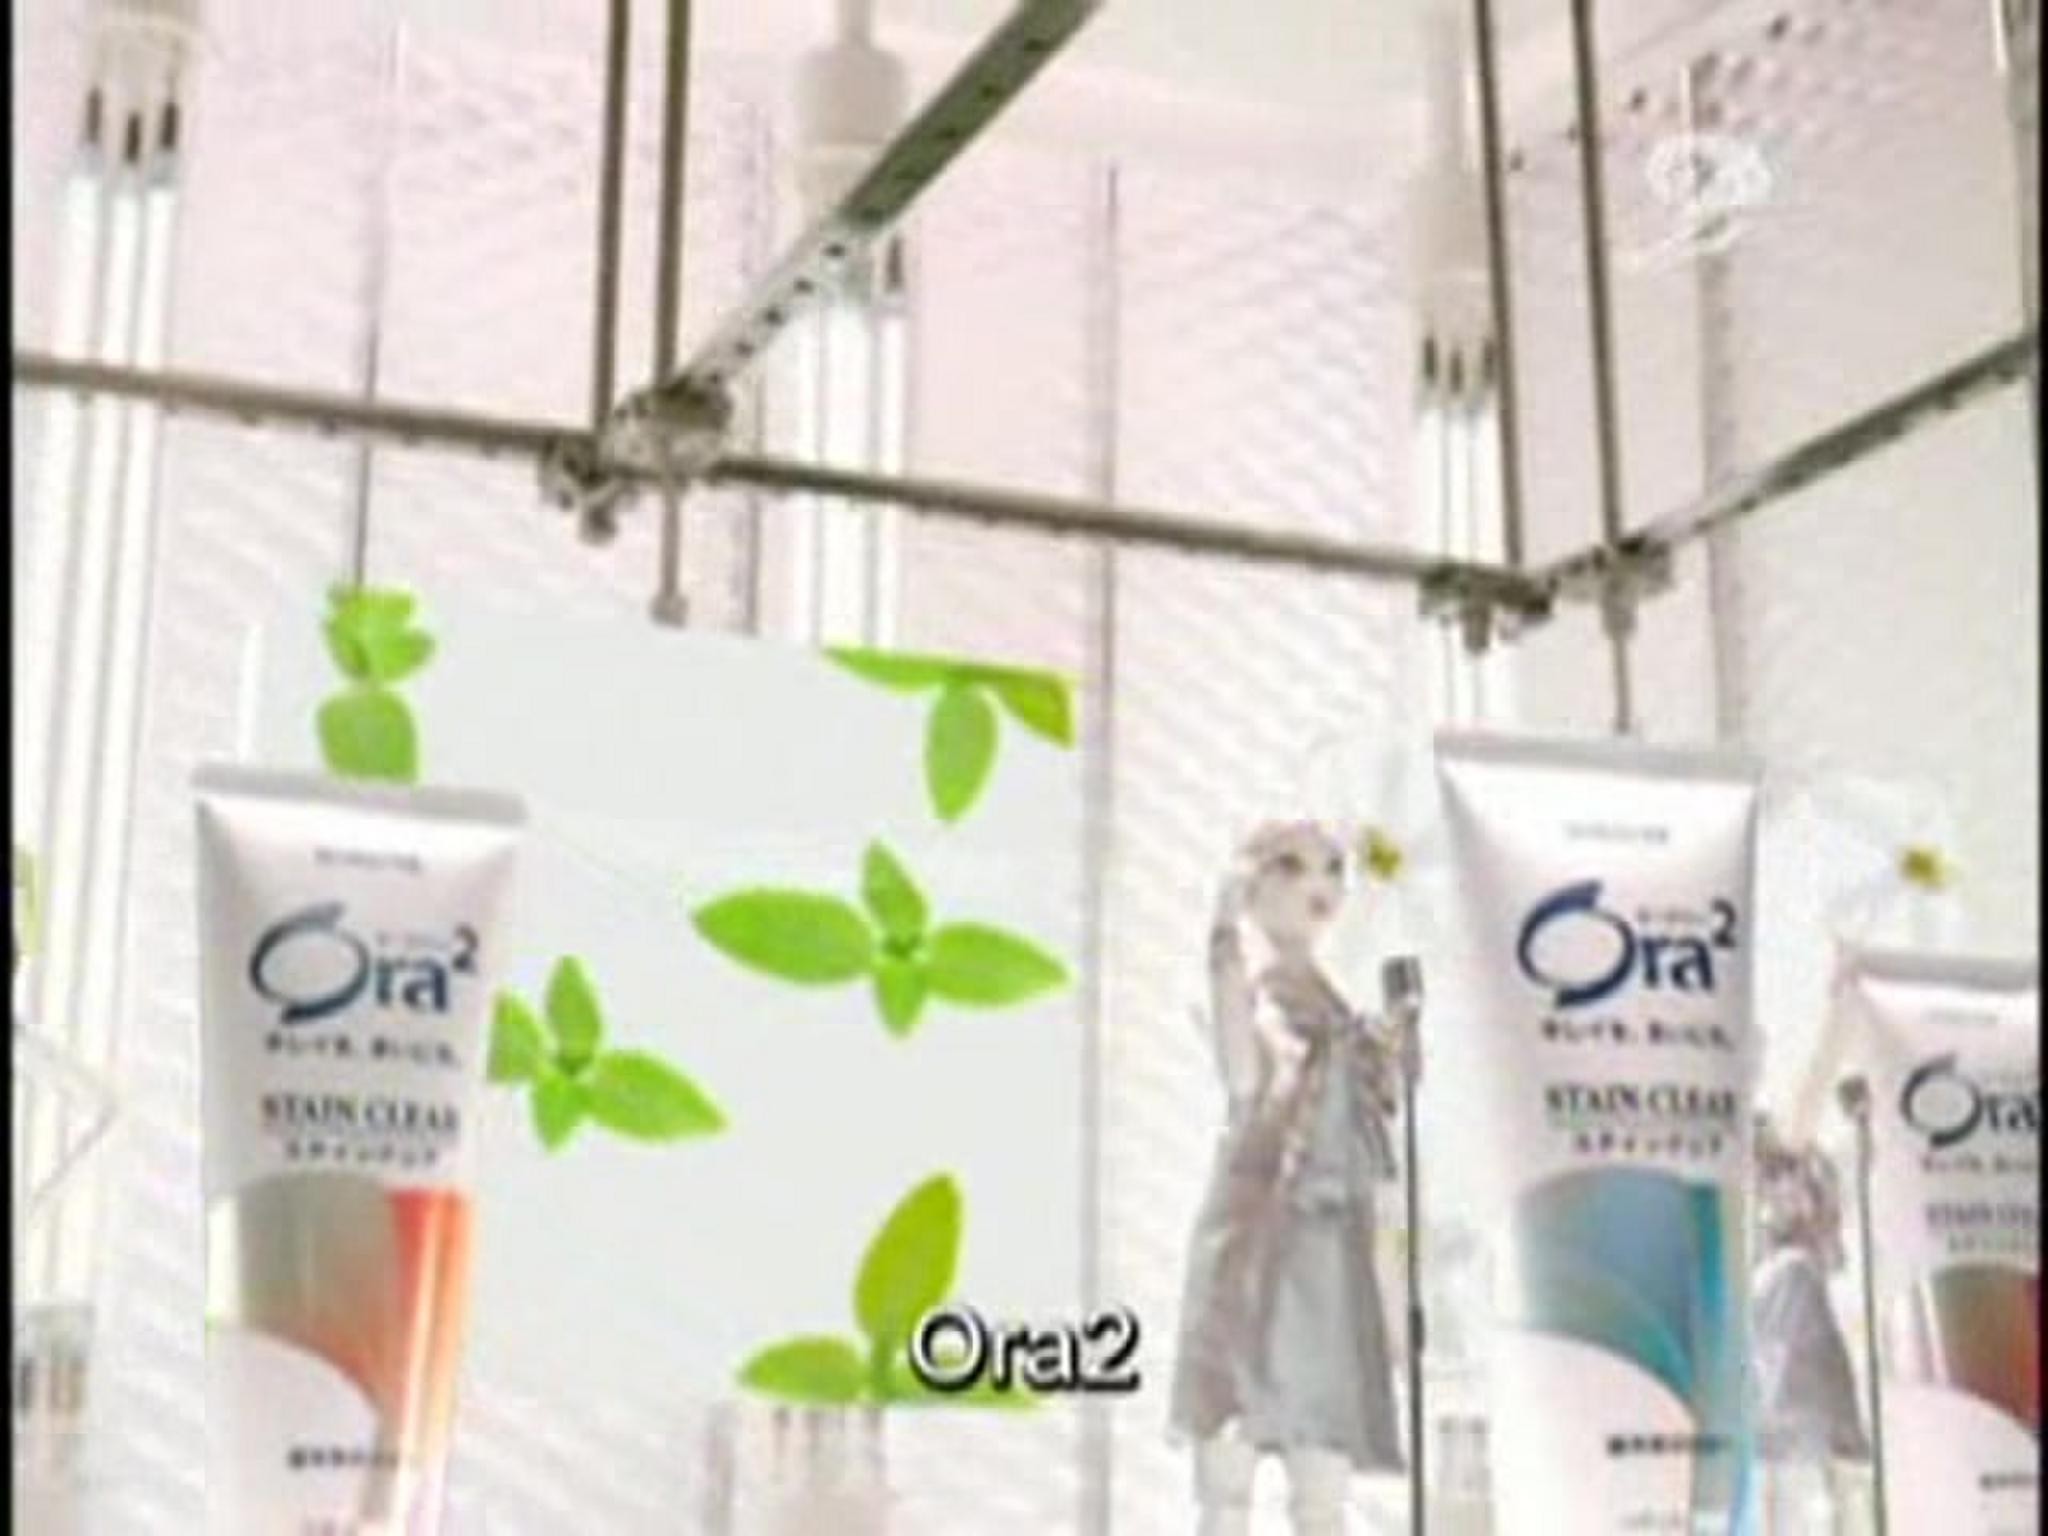 ORA2 STAIN CLEAR TOOTHPASTE